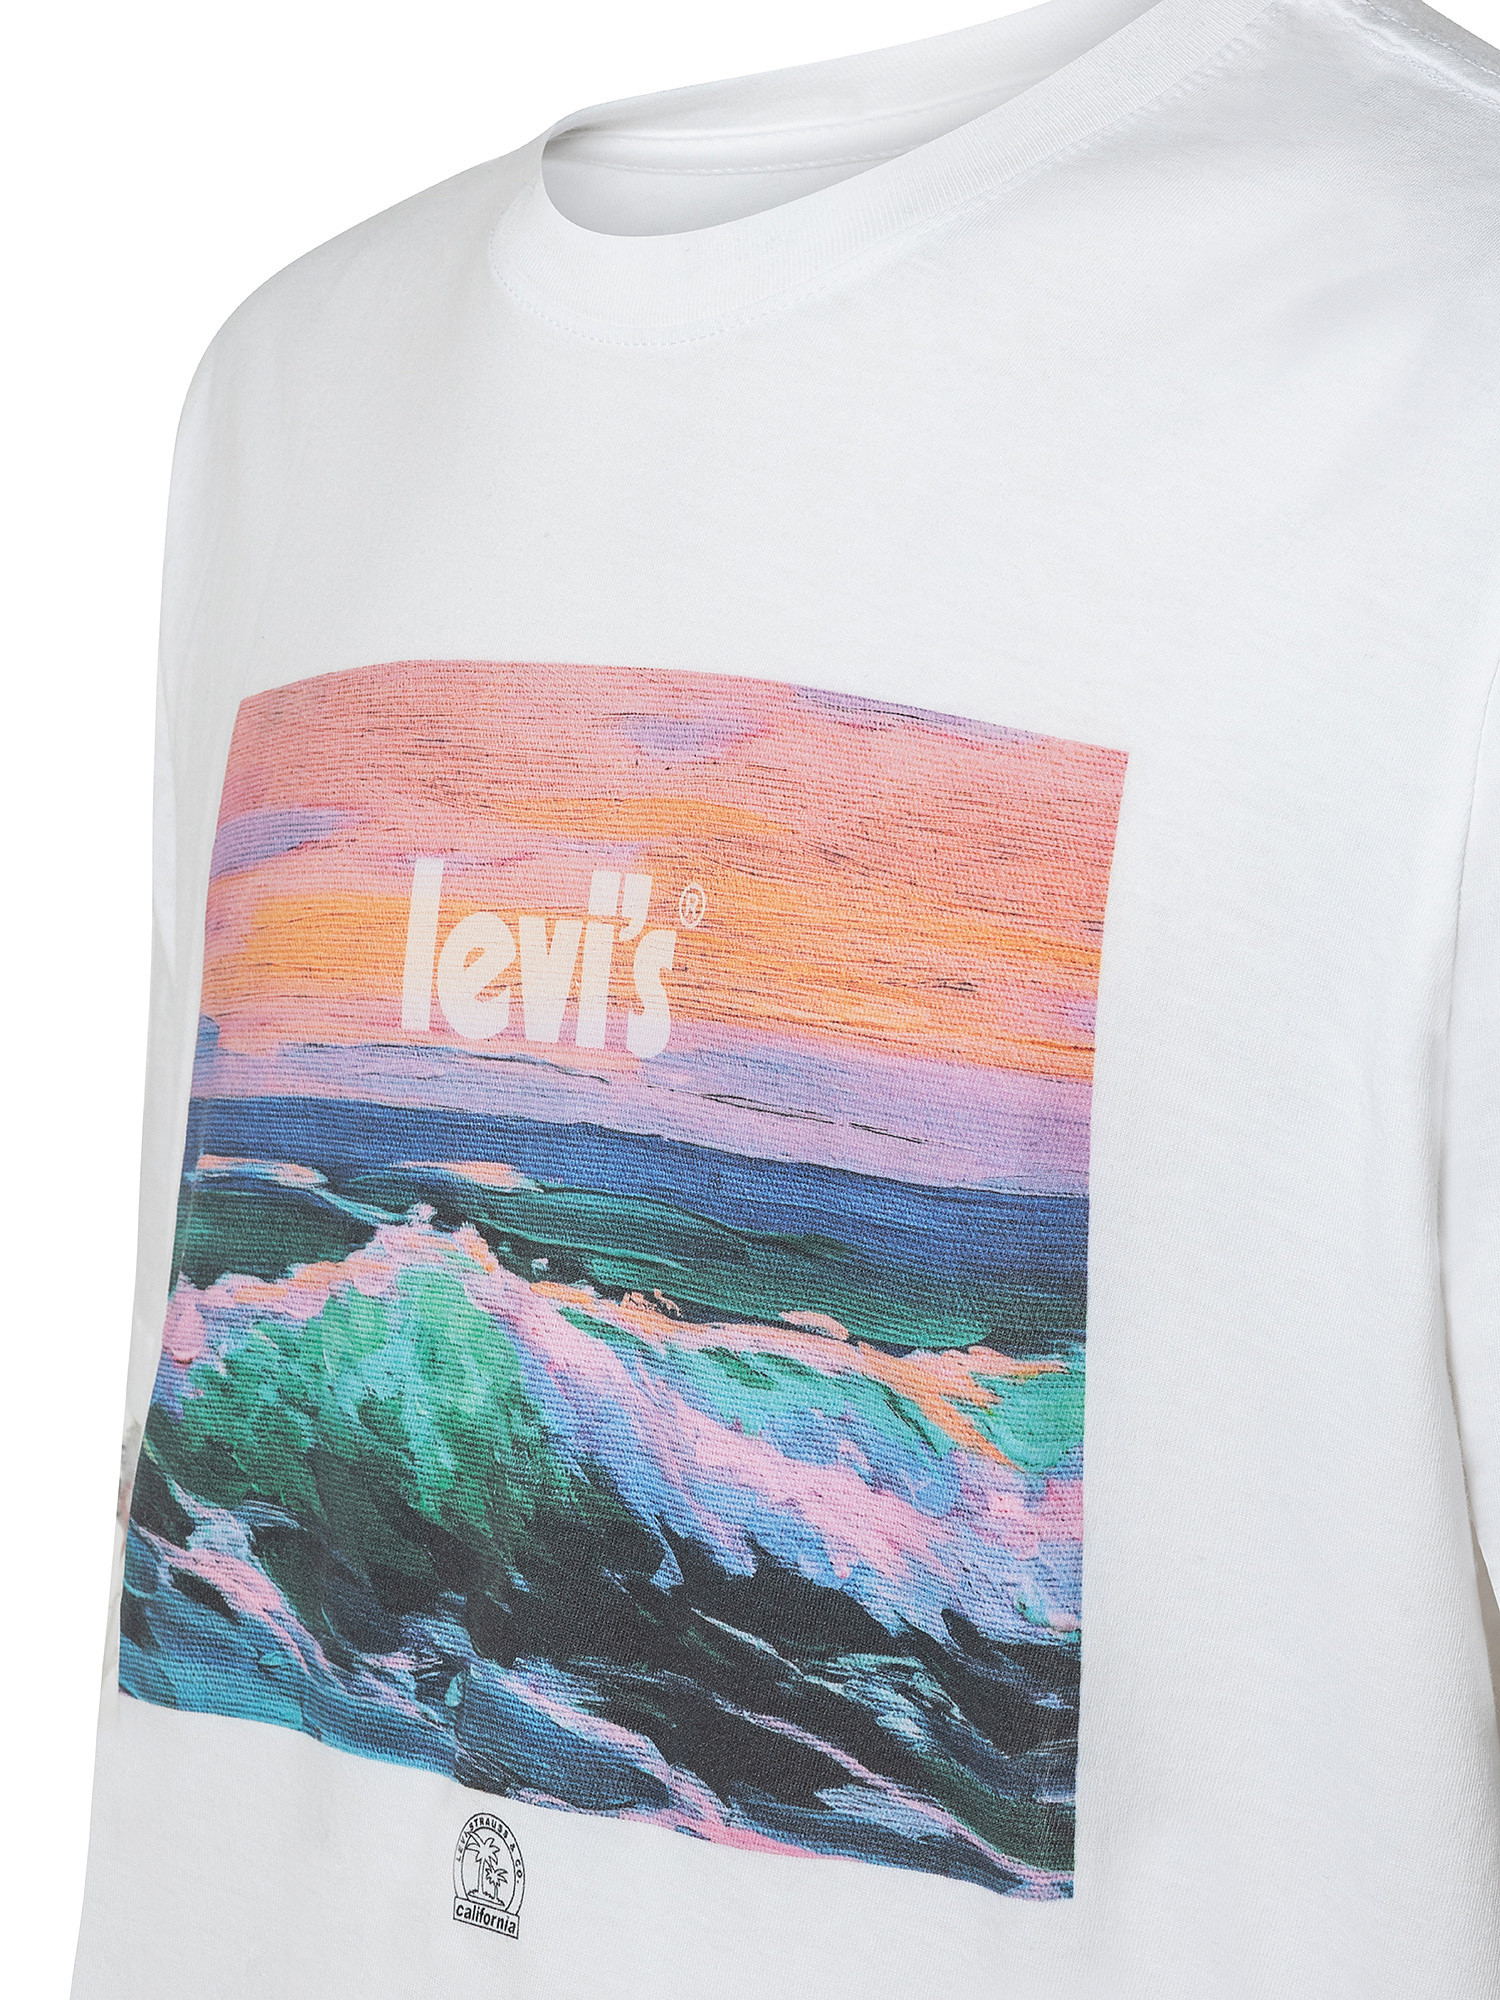 Graphic Tee, Bianco, large image number 2